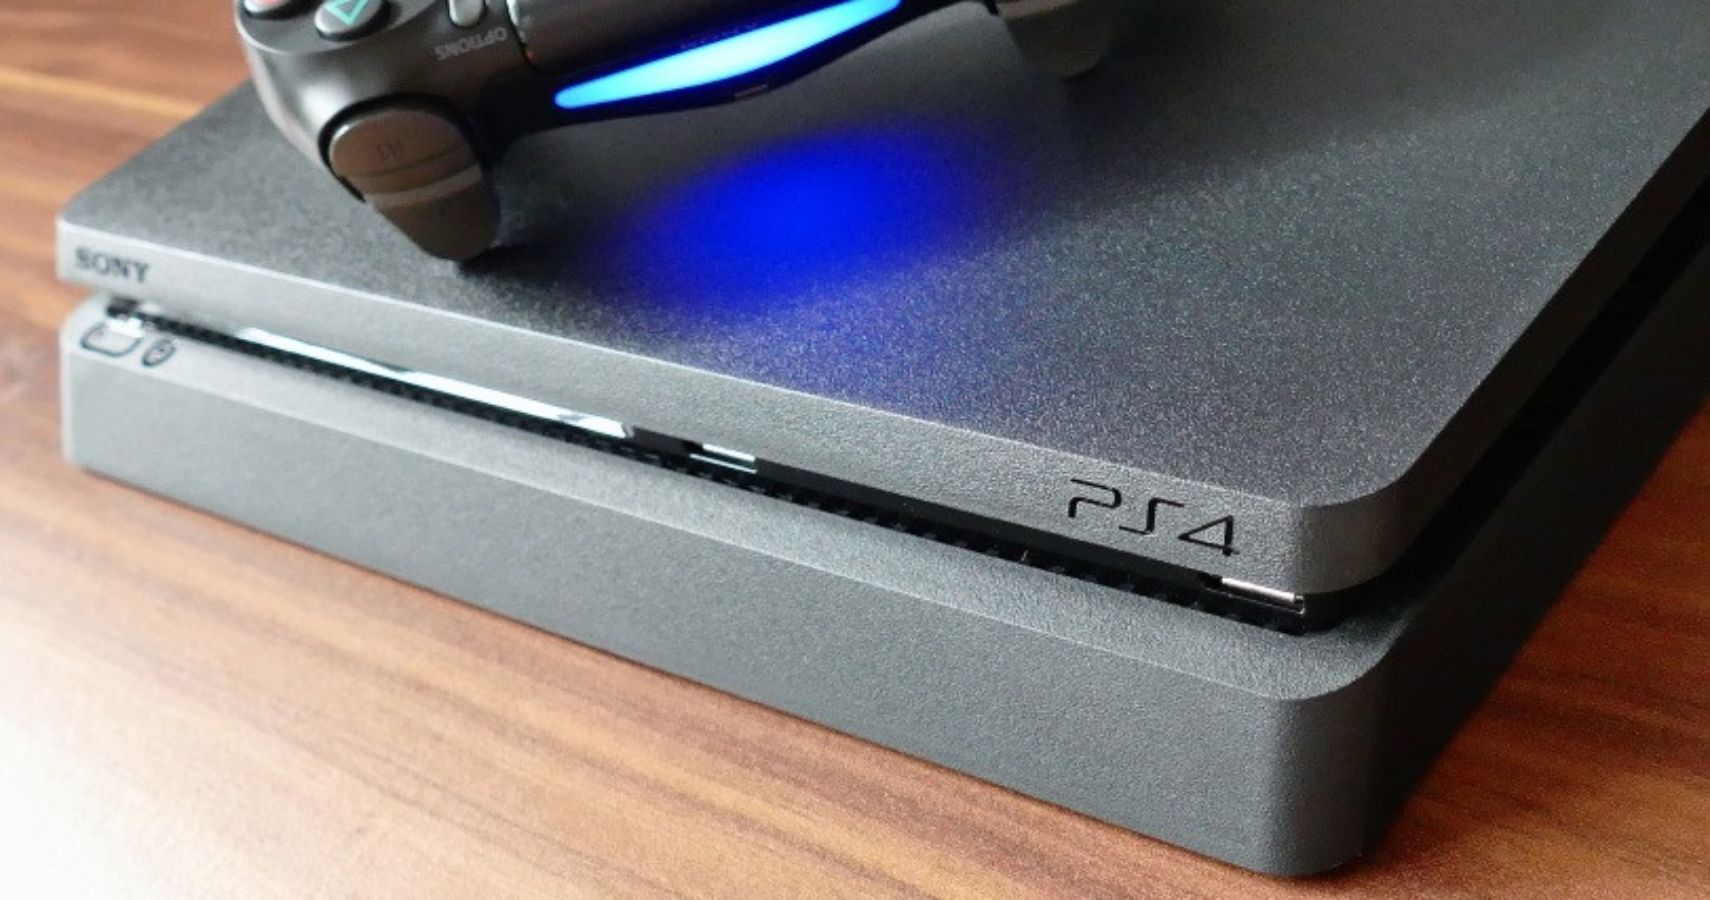 Sony Confirms It Will Stop Selling Game Codes To GameStop & Other Retailers